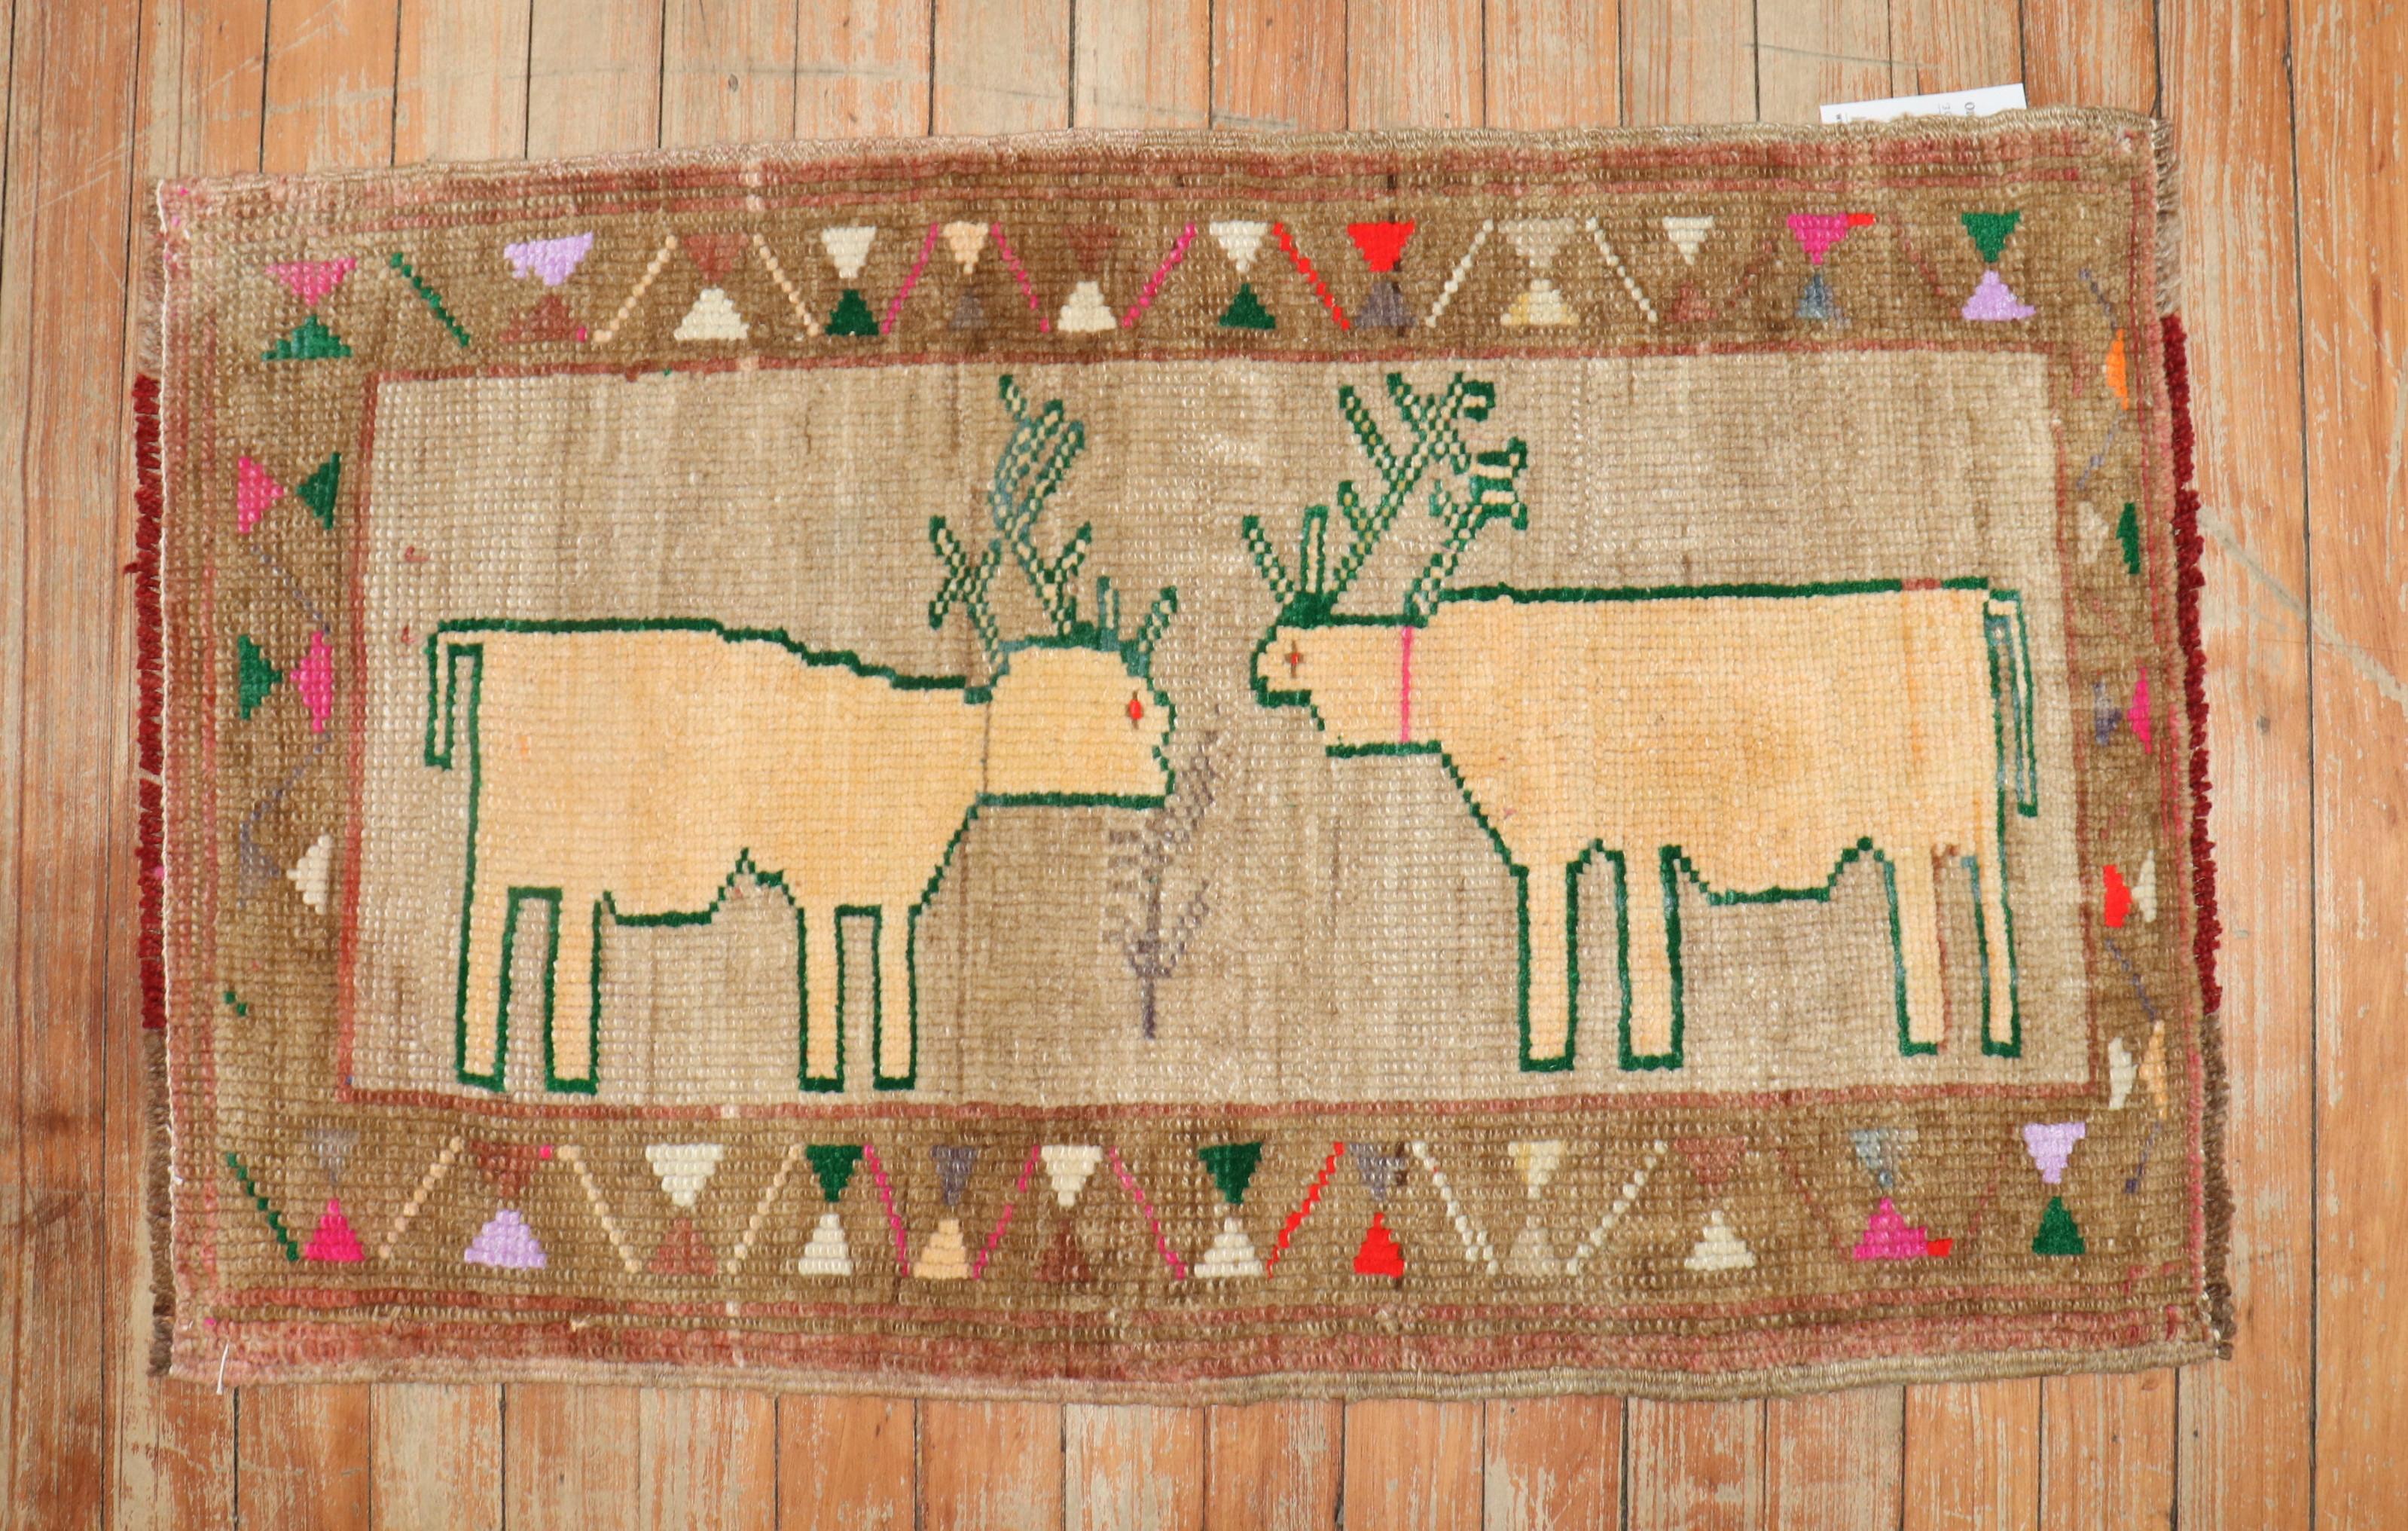 Mid-20th Century Turkish rug depicting 2 deers on a brown field. Check the border out too!

Measures: 1'9'' x 2'9''.